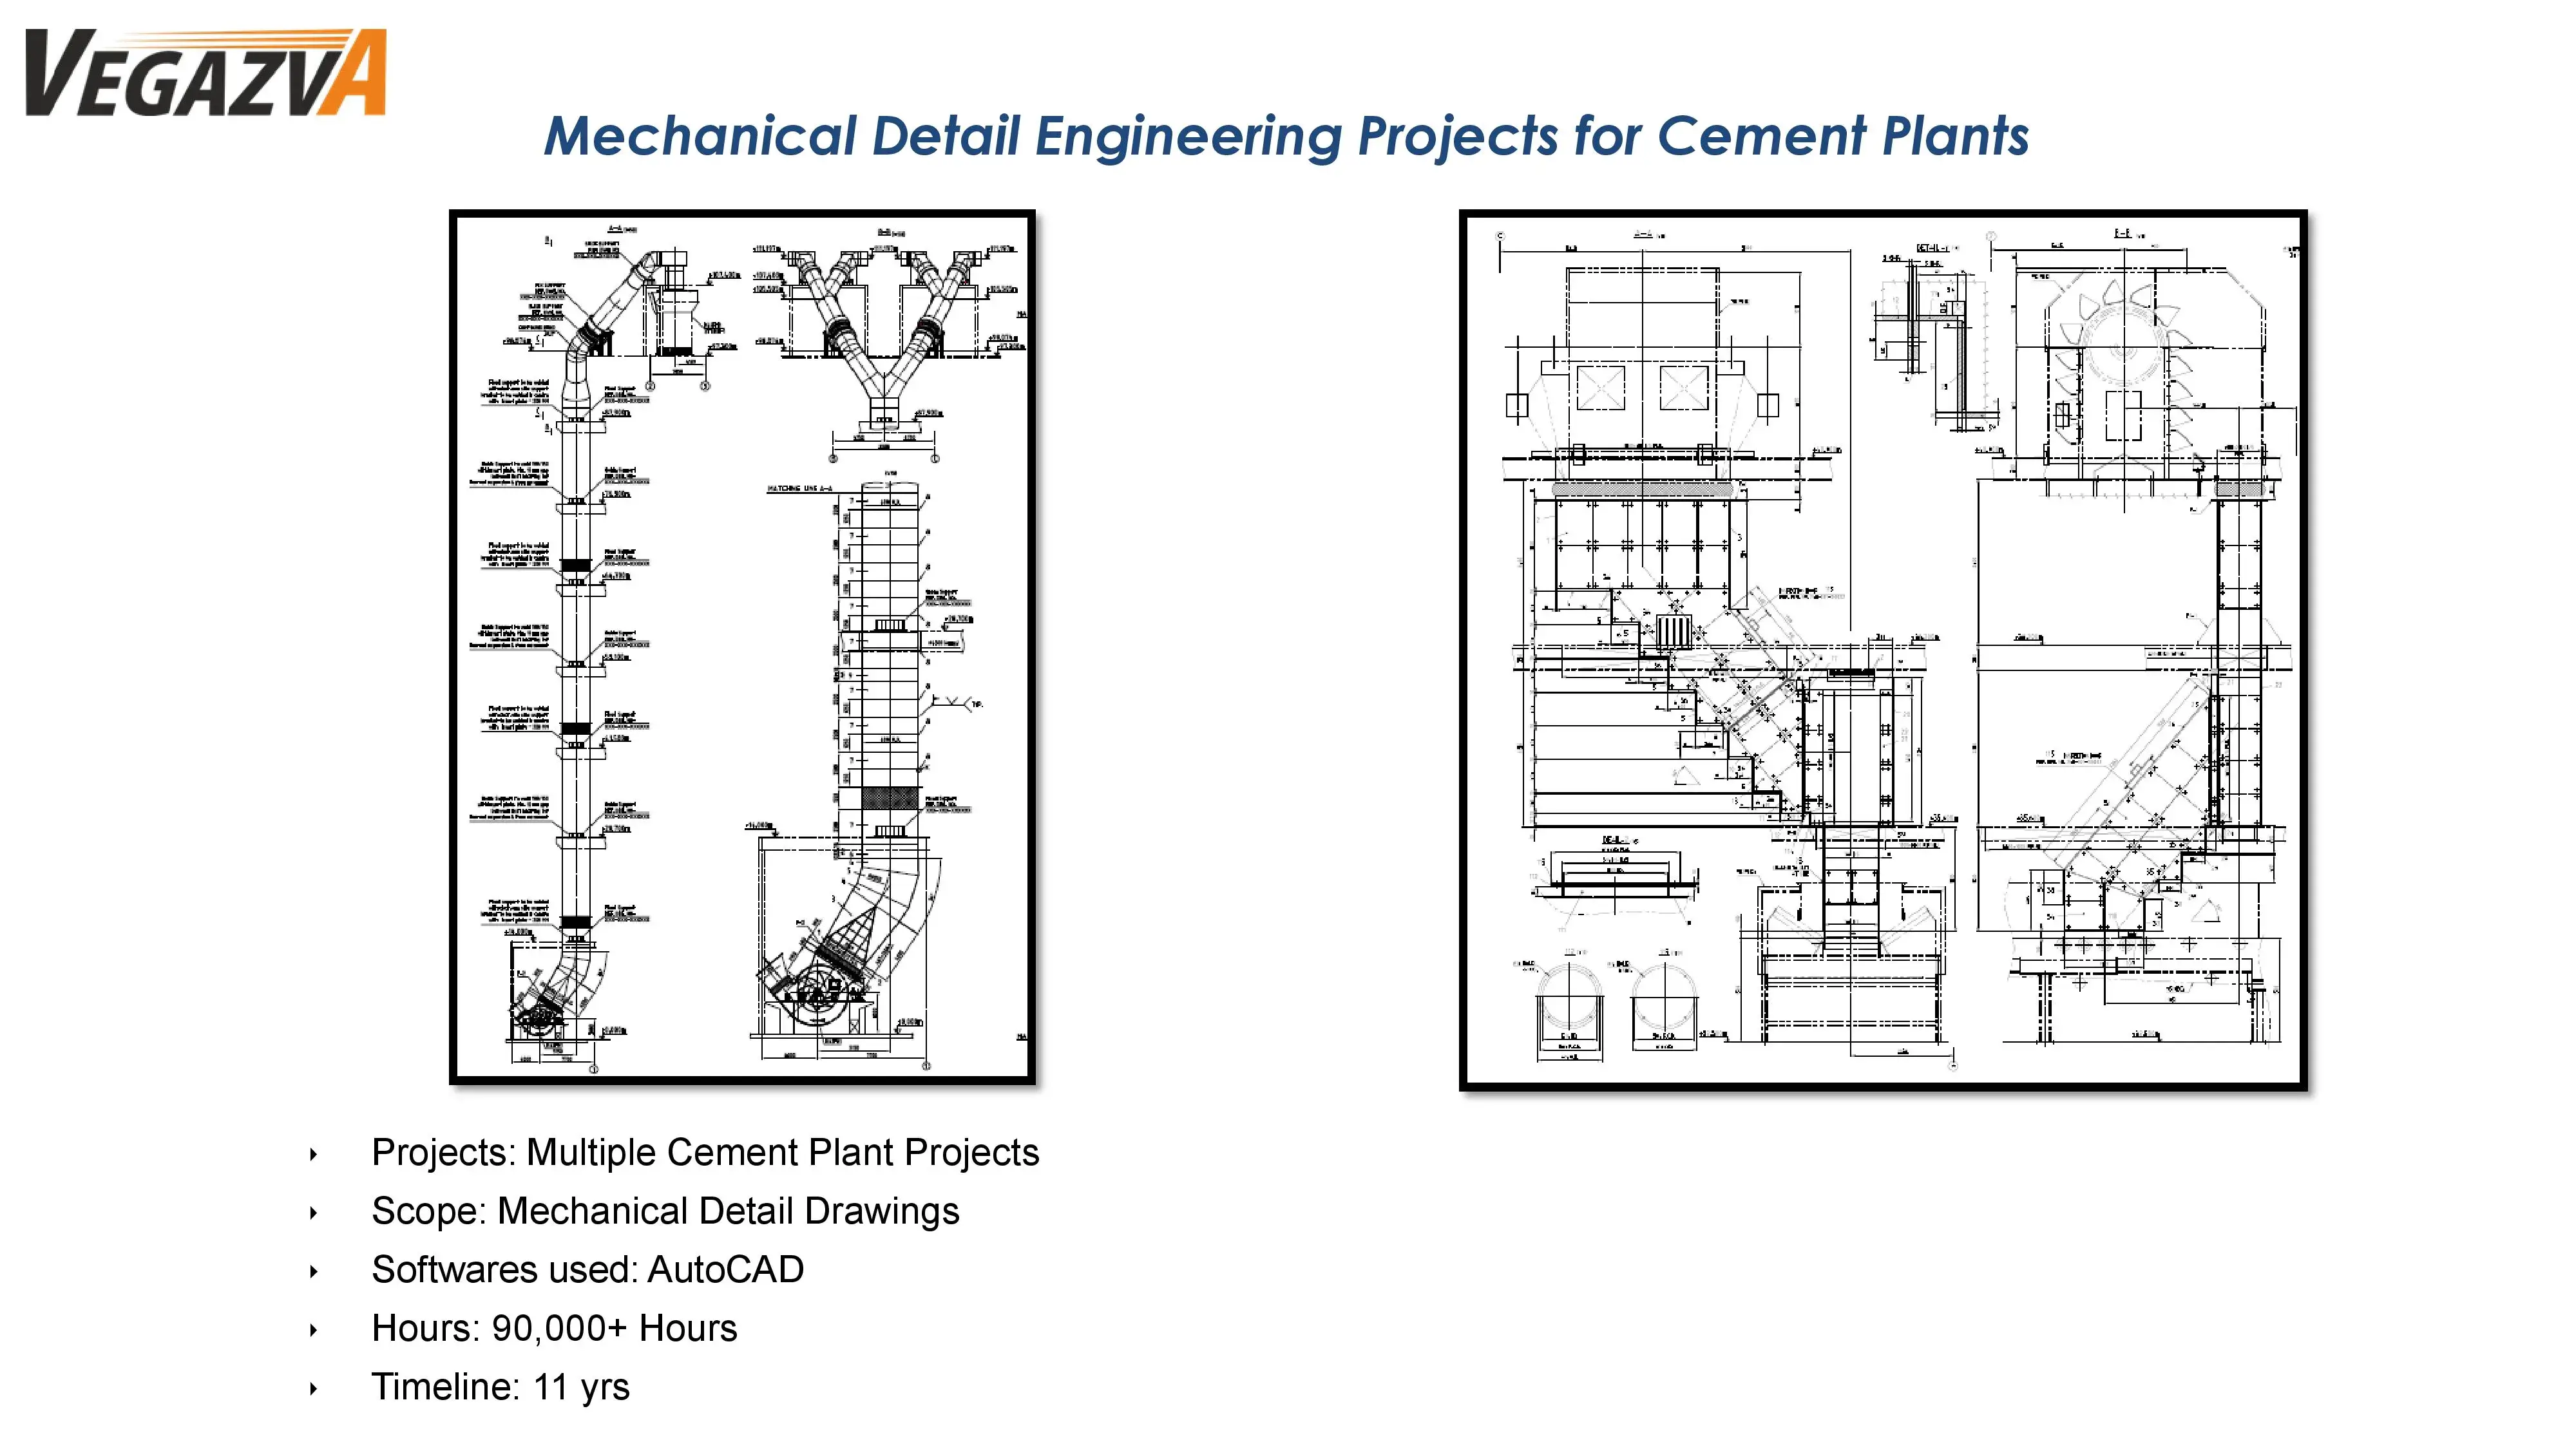 Signature Project - Mechanical Detail Engineering Projects for Cement Plants